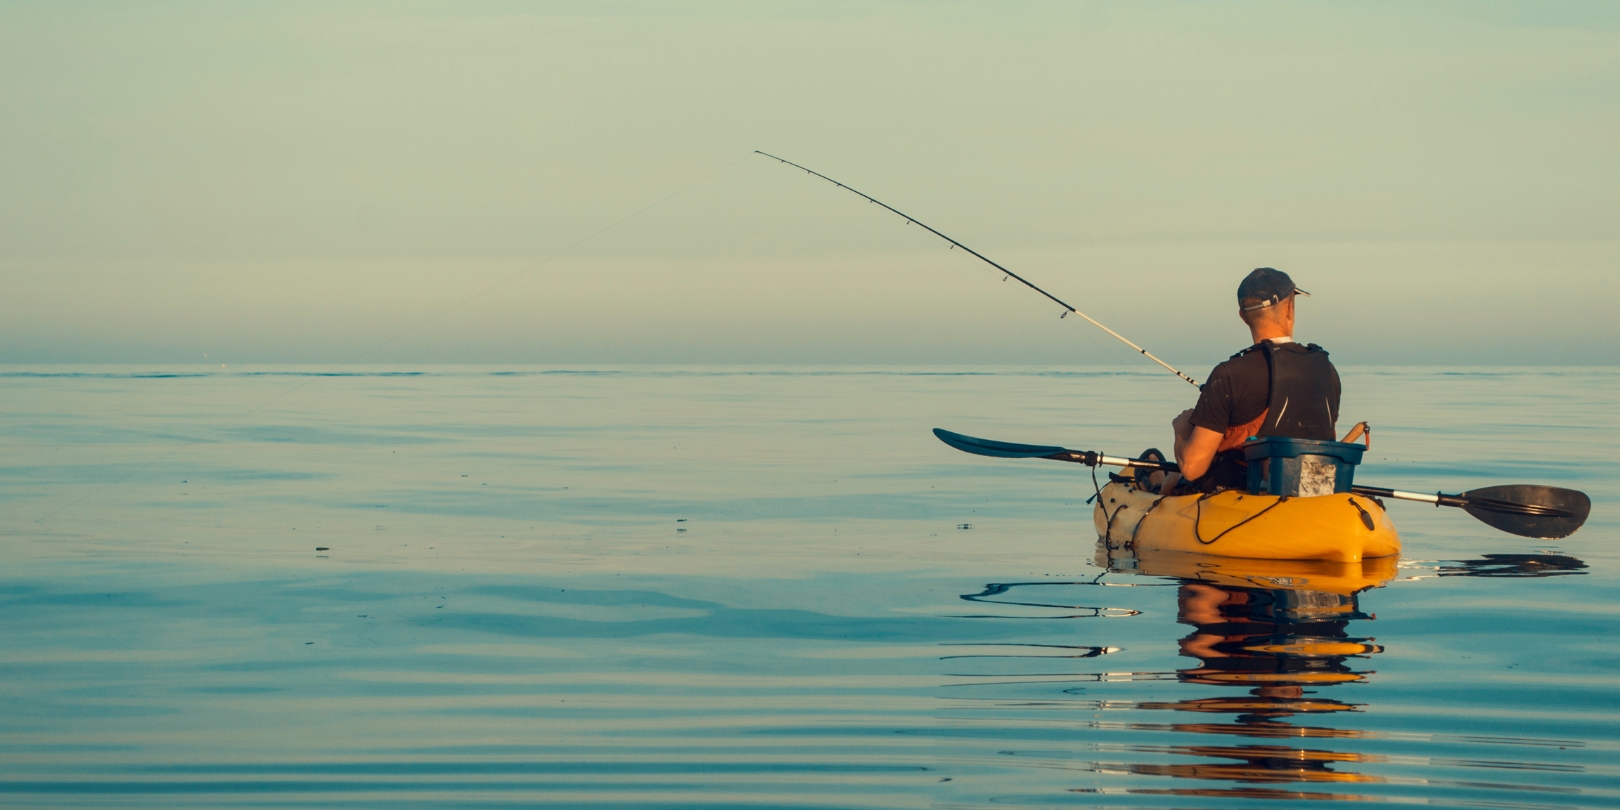 5 Kayak Fishing Safety Tips for a Smooth Adventure